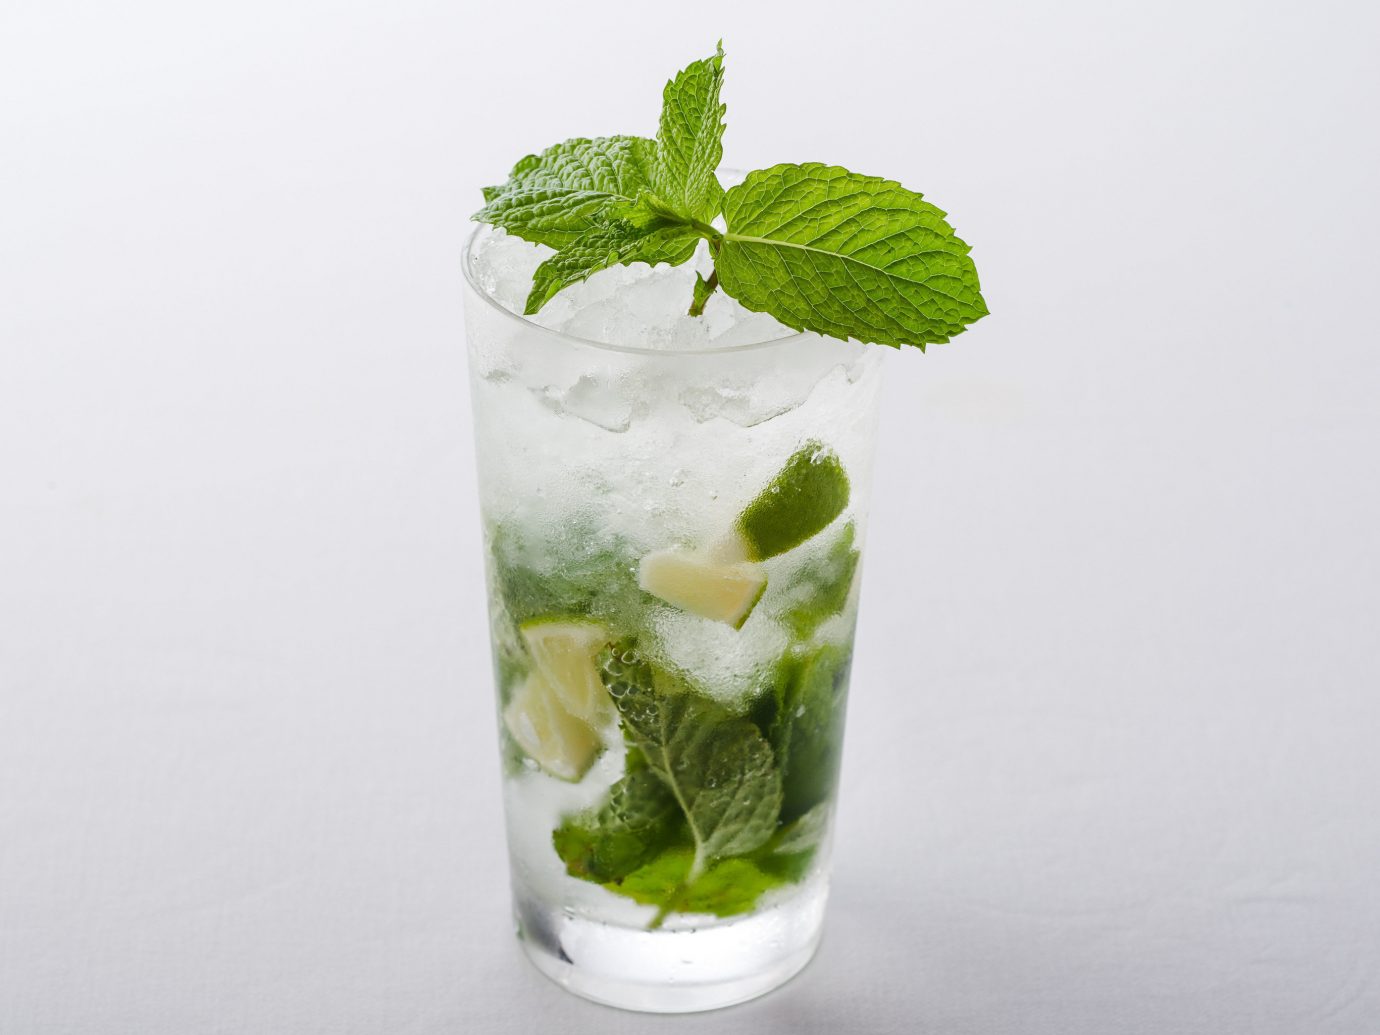 Trip Ideas mojito Drink plant cocktail mint julep the rickey non alcoholic beverage limonana cocktail garnish green rebujito lime juice limeade vodka and tonic lime health shake gin and tonic spritzer garnish dessert